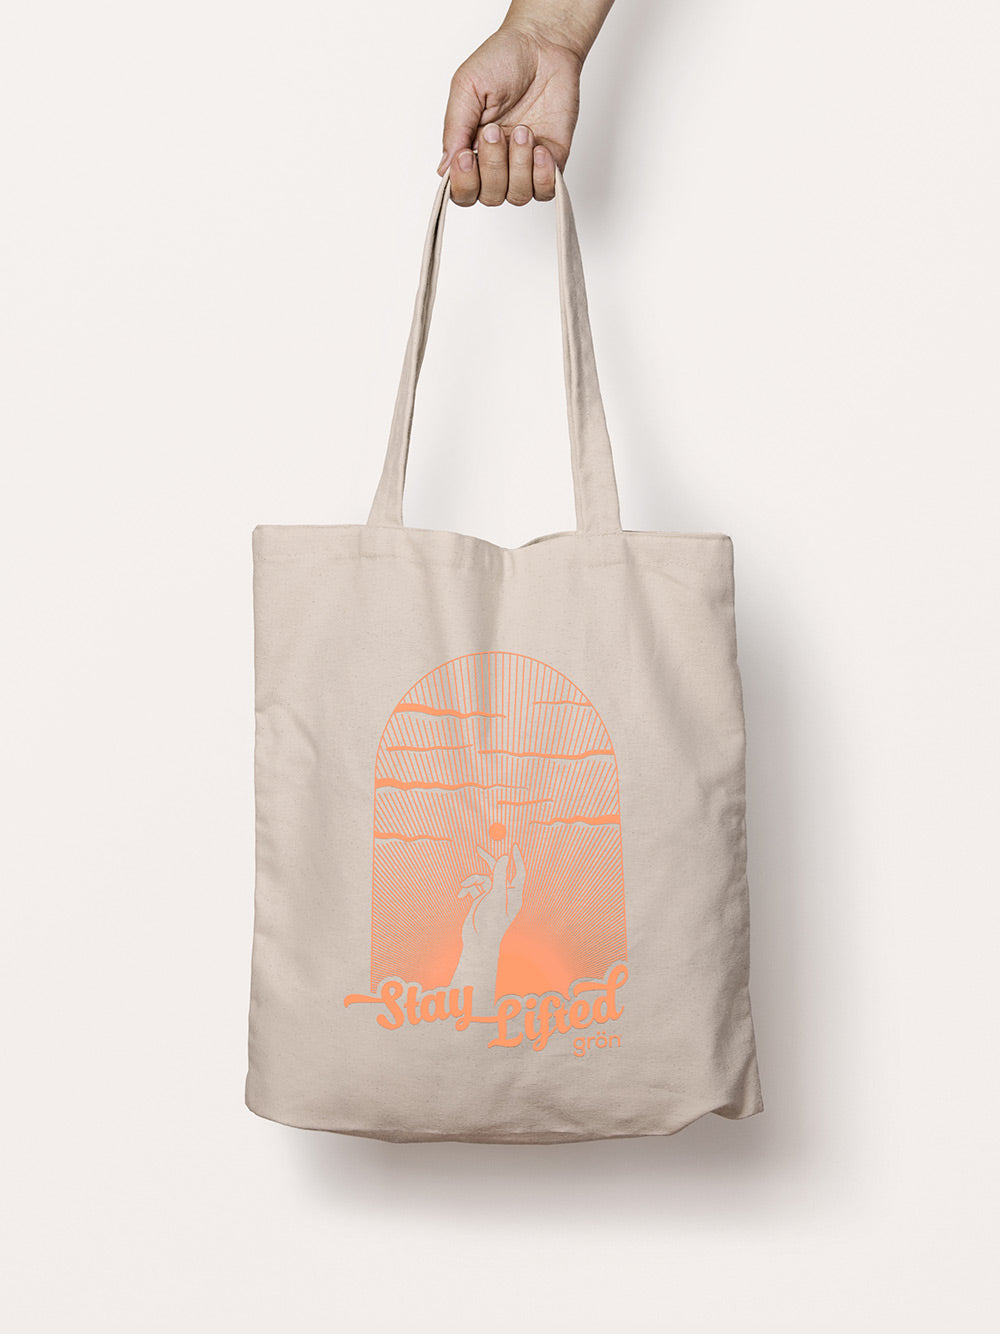 Stay Lifted Tote